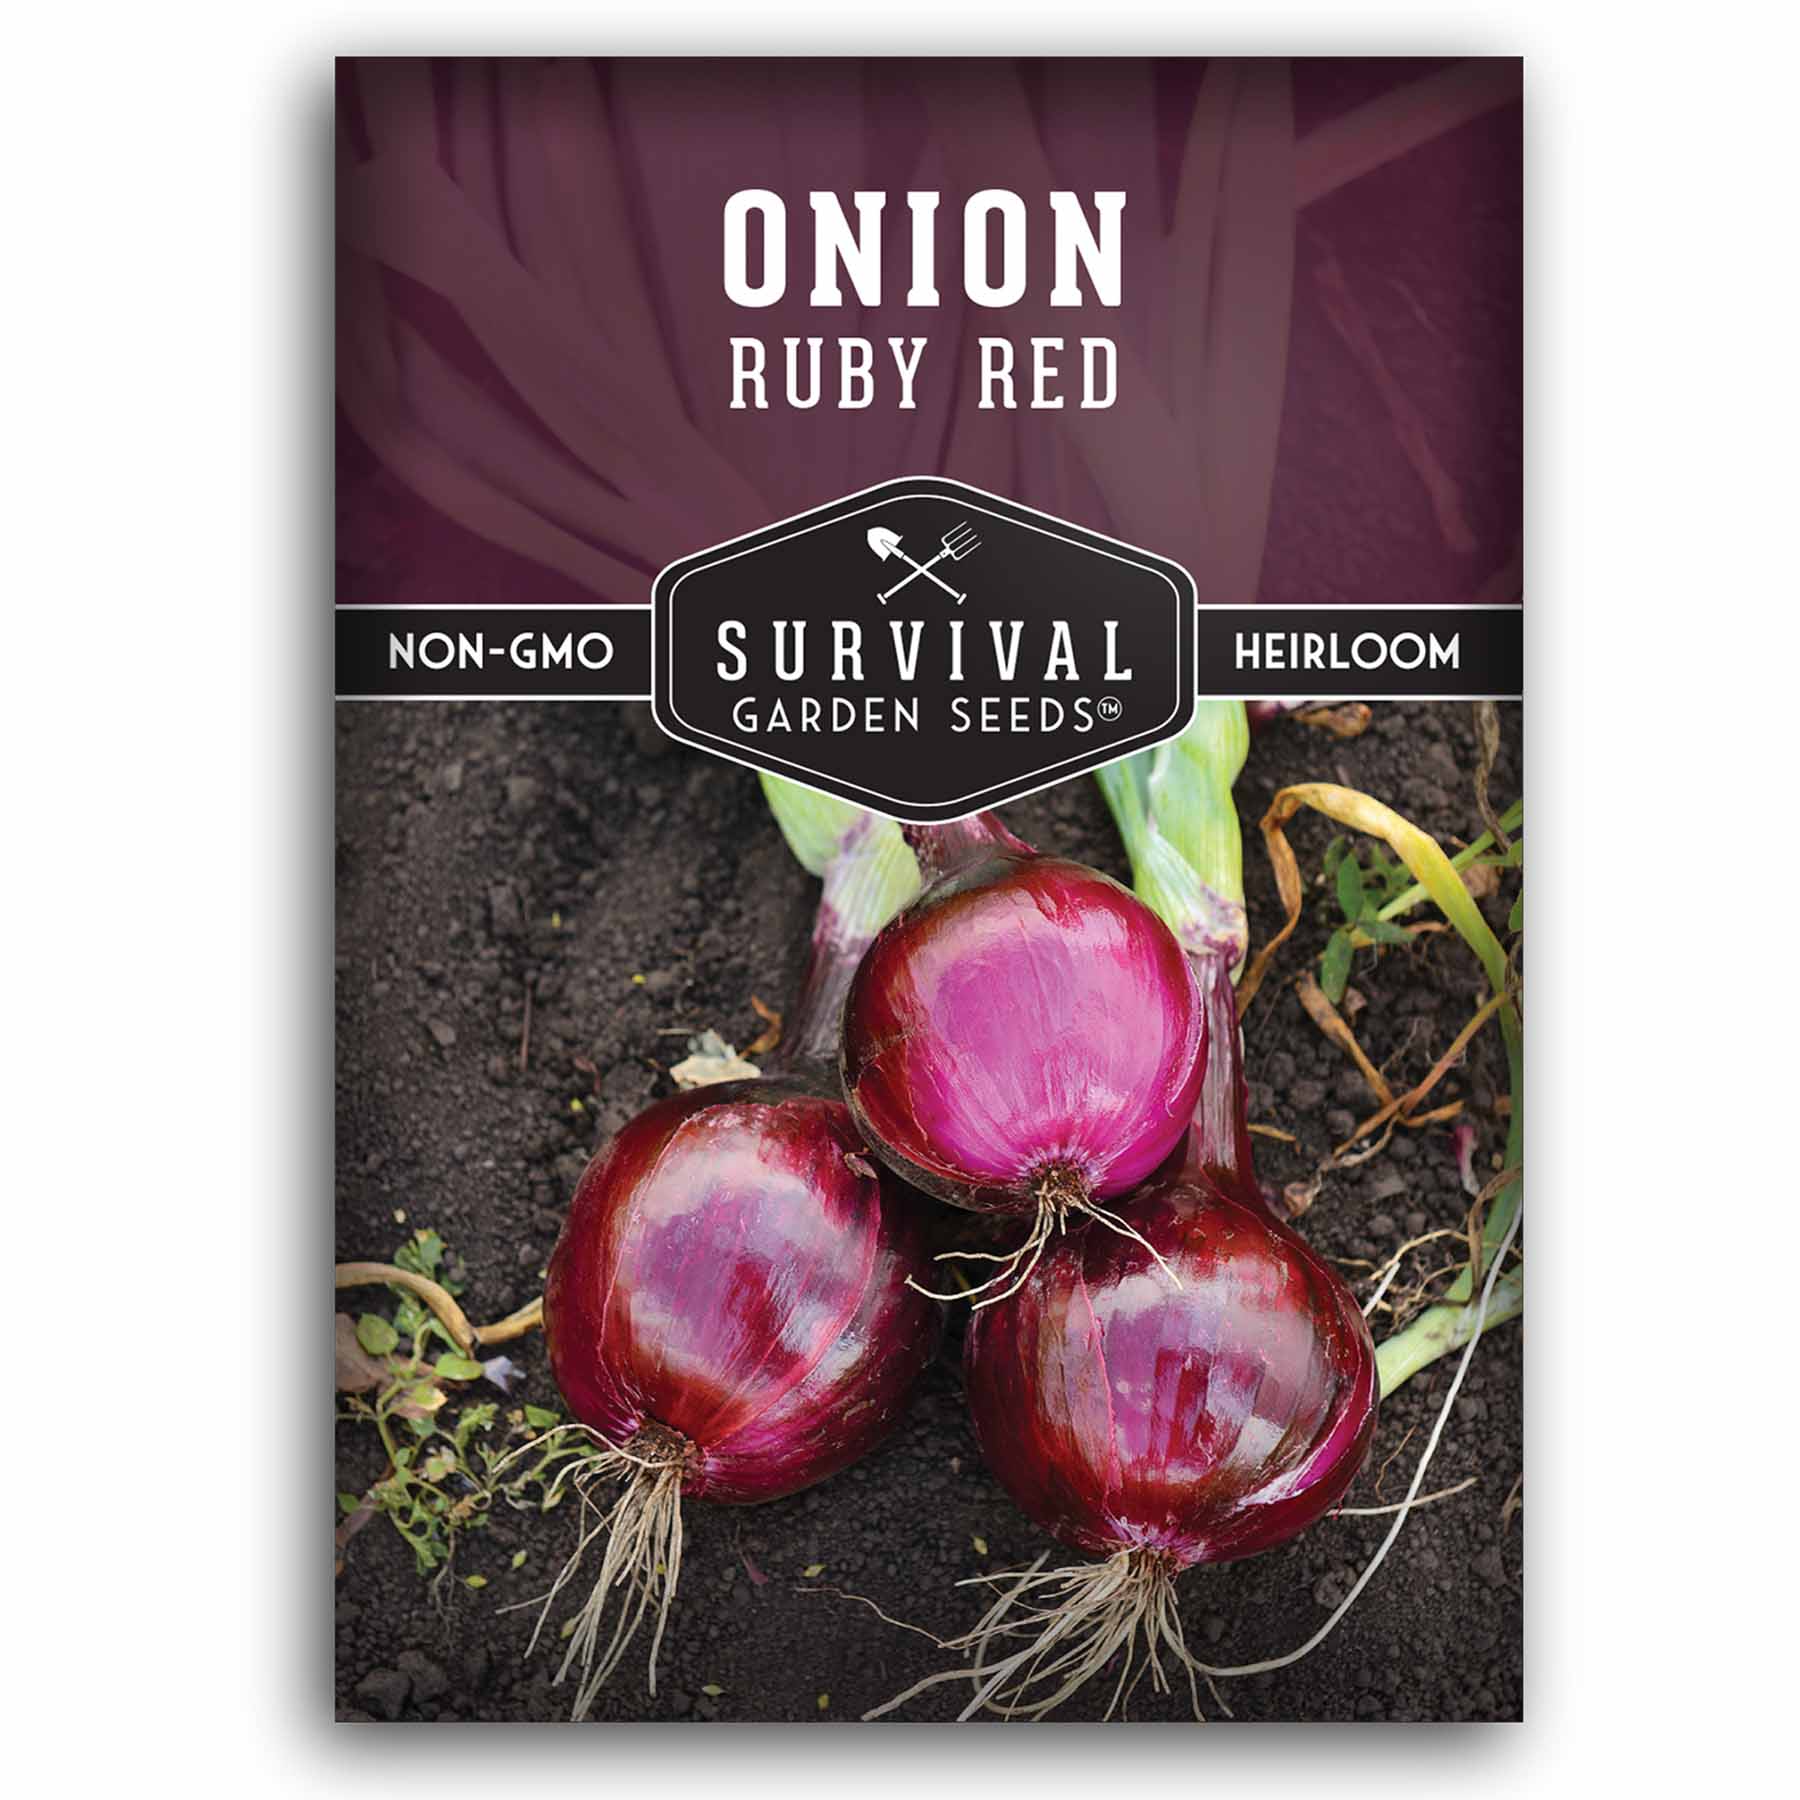 1 packet of Ruby Red Onion seeds